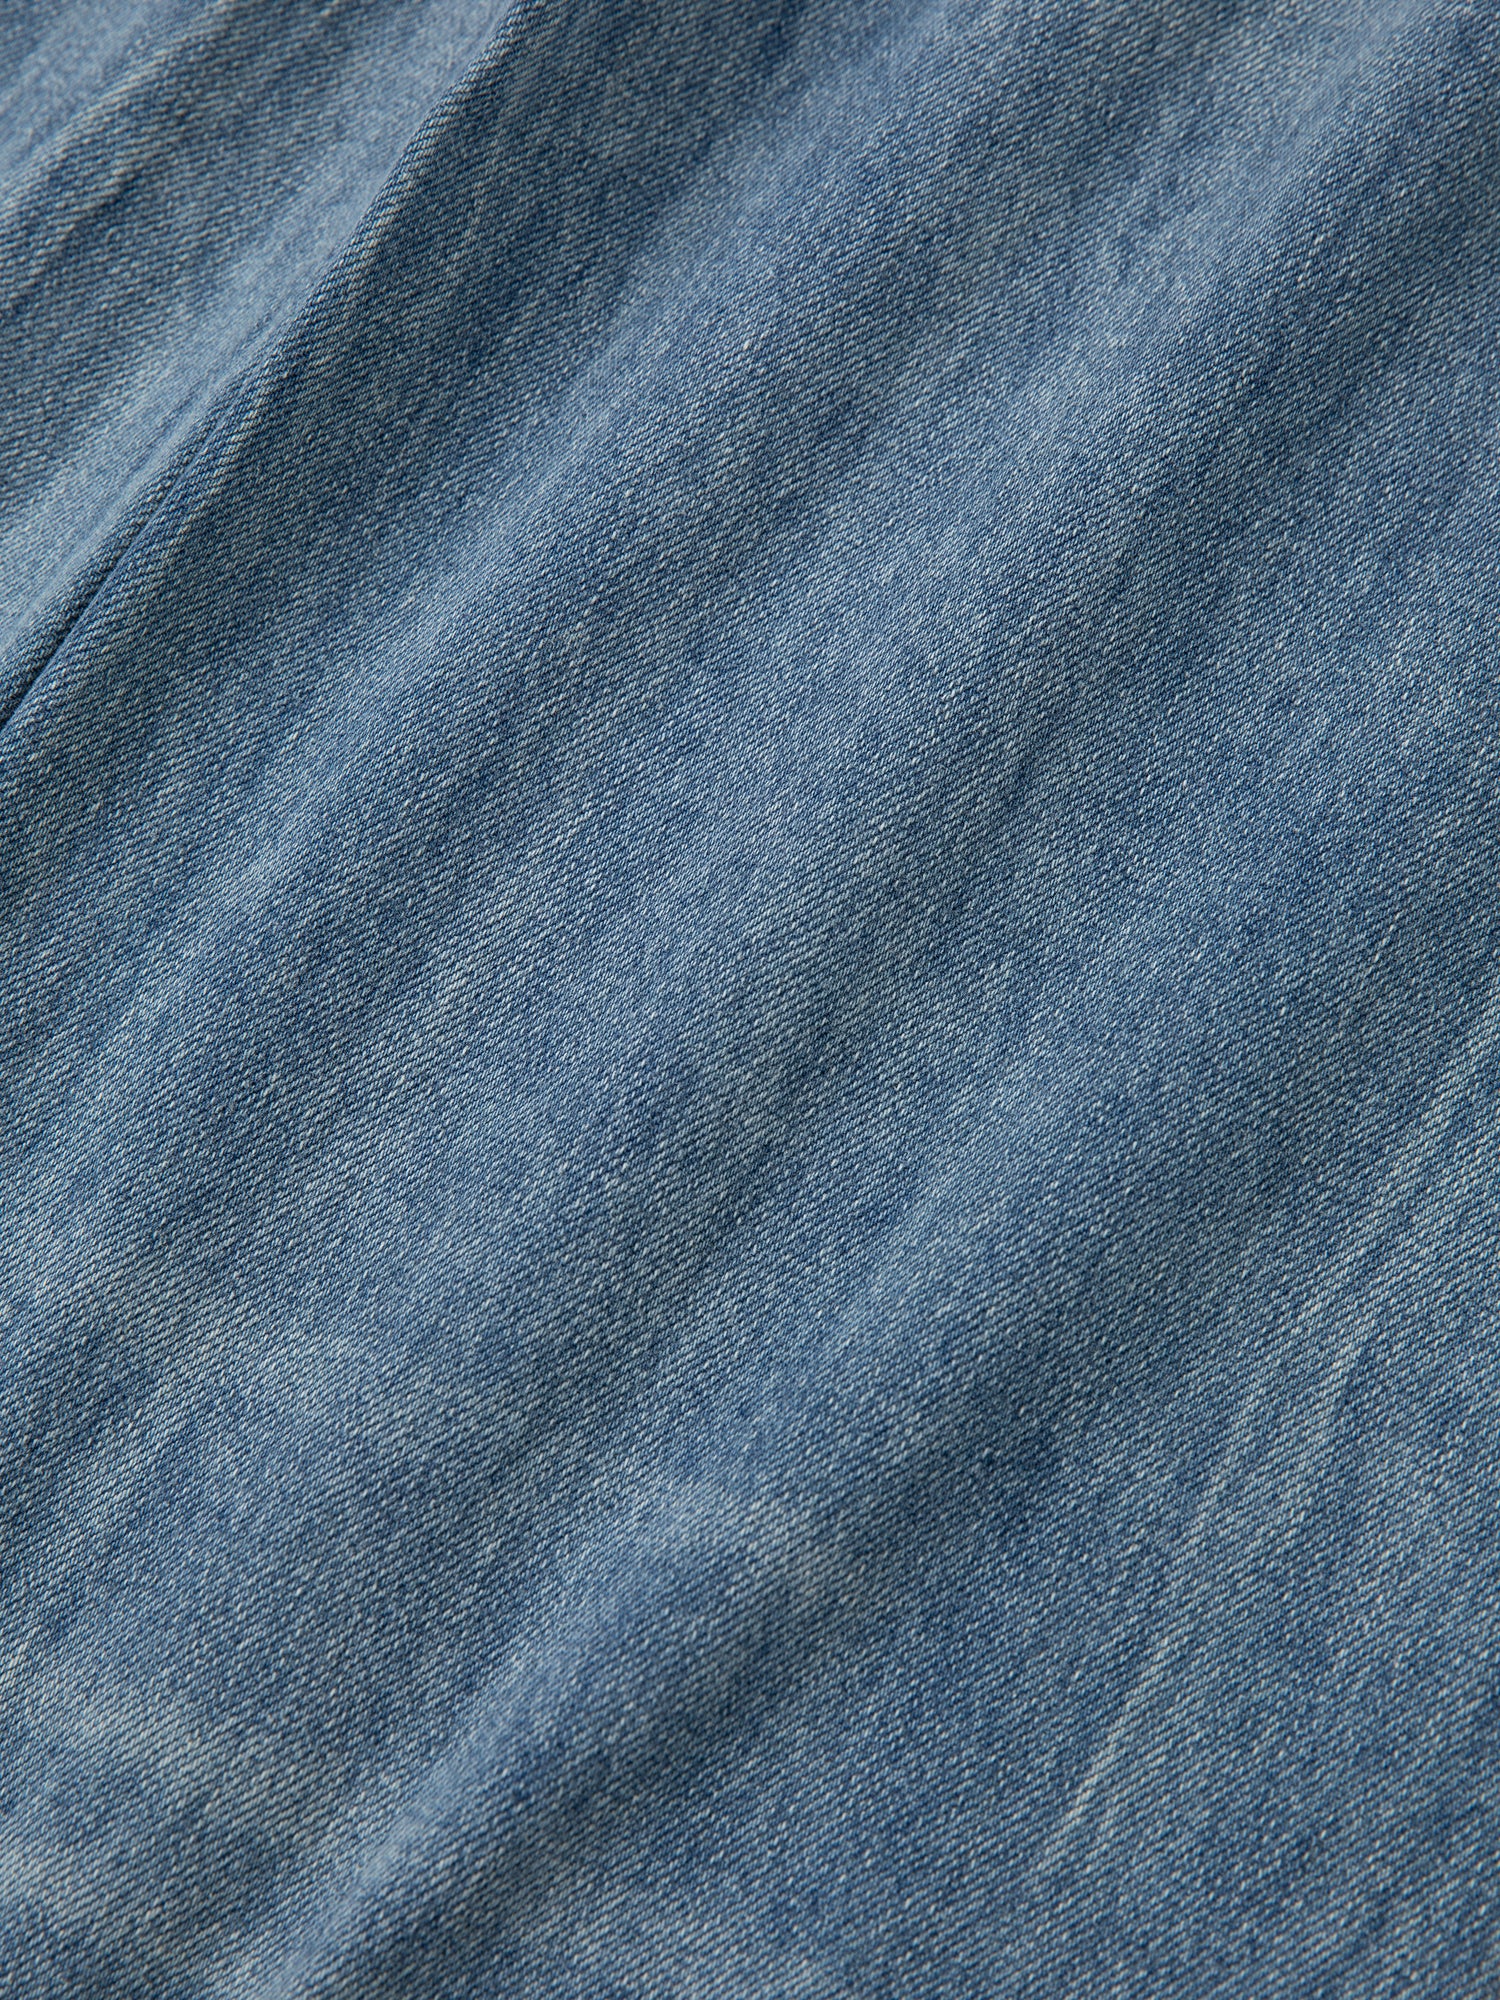 A close up of Found's Lacy Baggy Jeans Blue denim fabric.